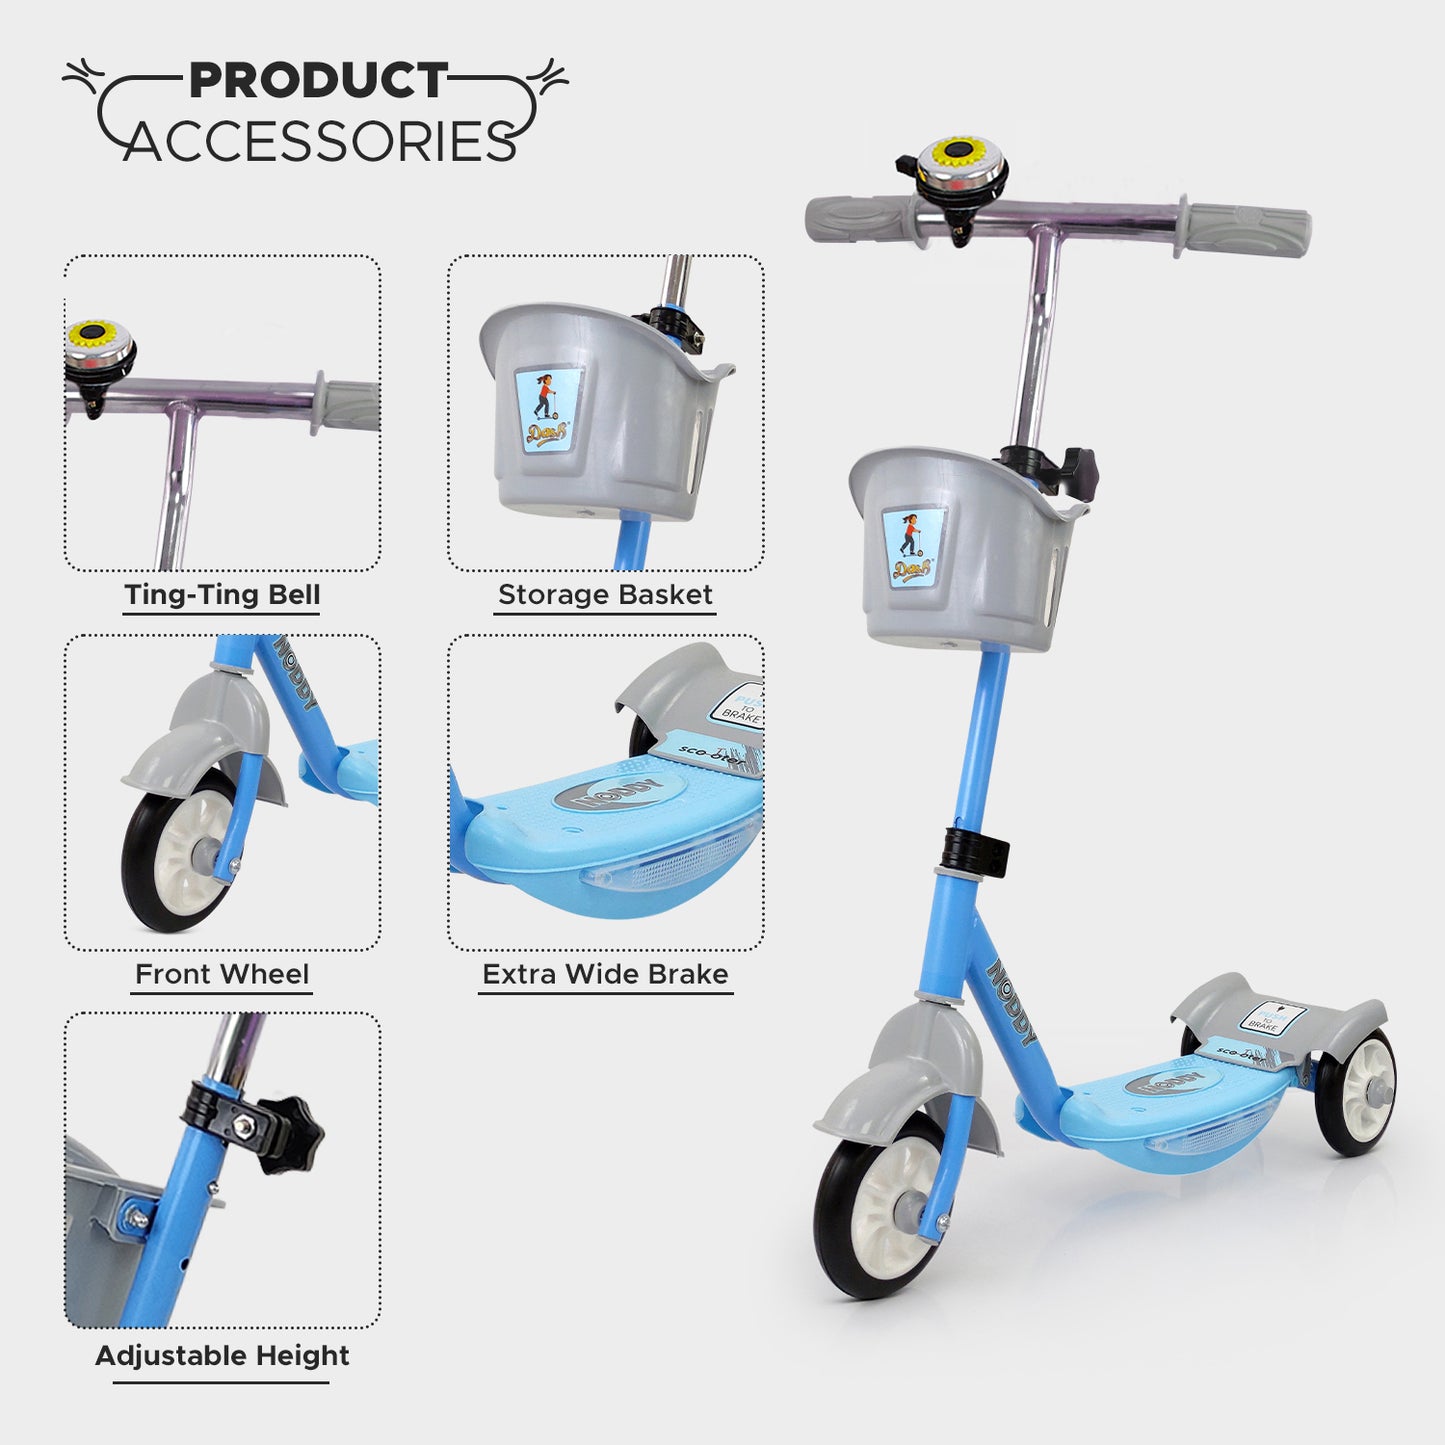 Dash Noddy Adjustable Height Kids Scooter for 3 to 6 Years (Choose Any Color)